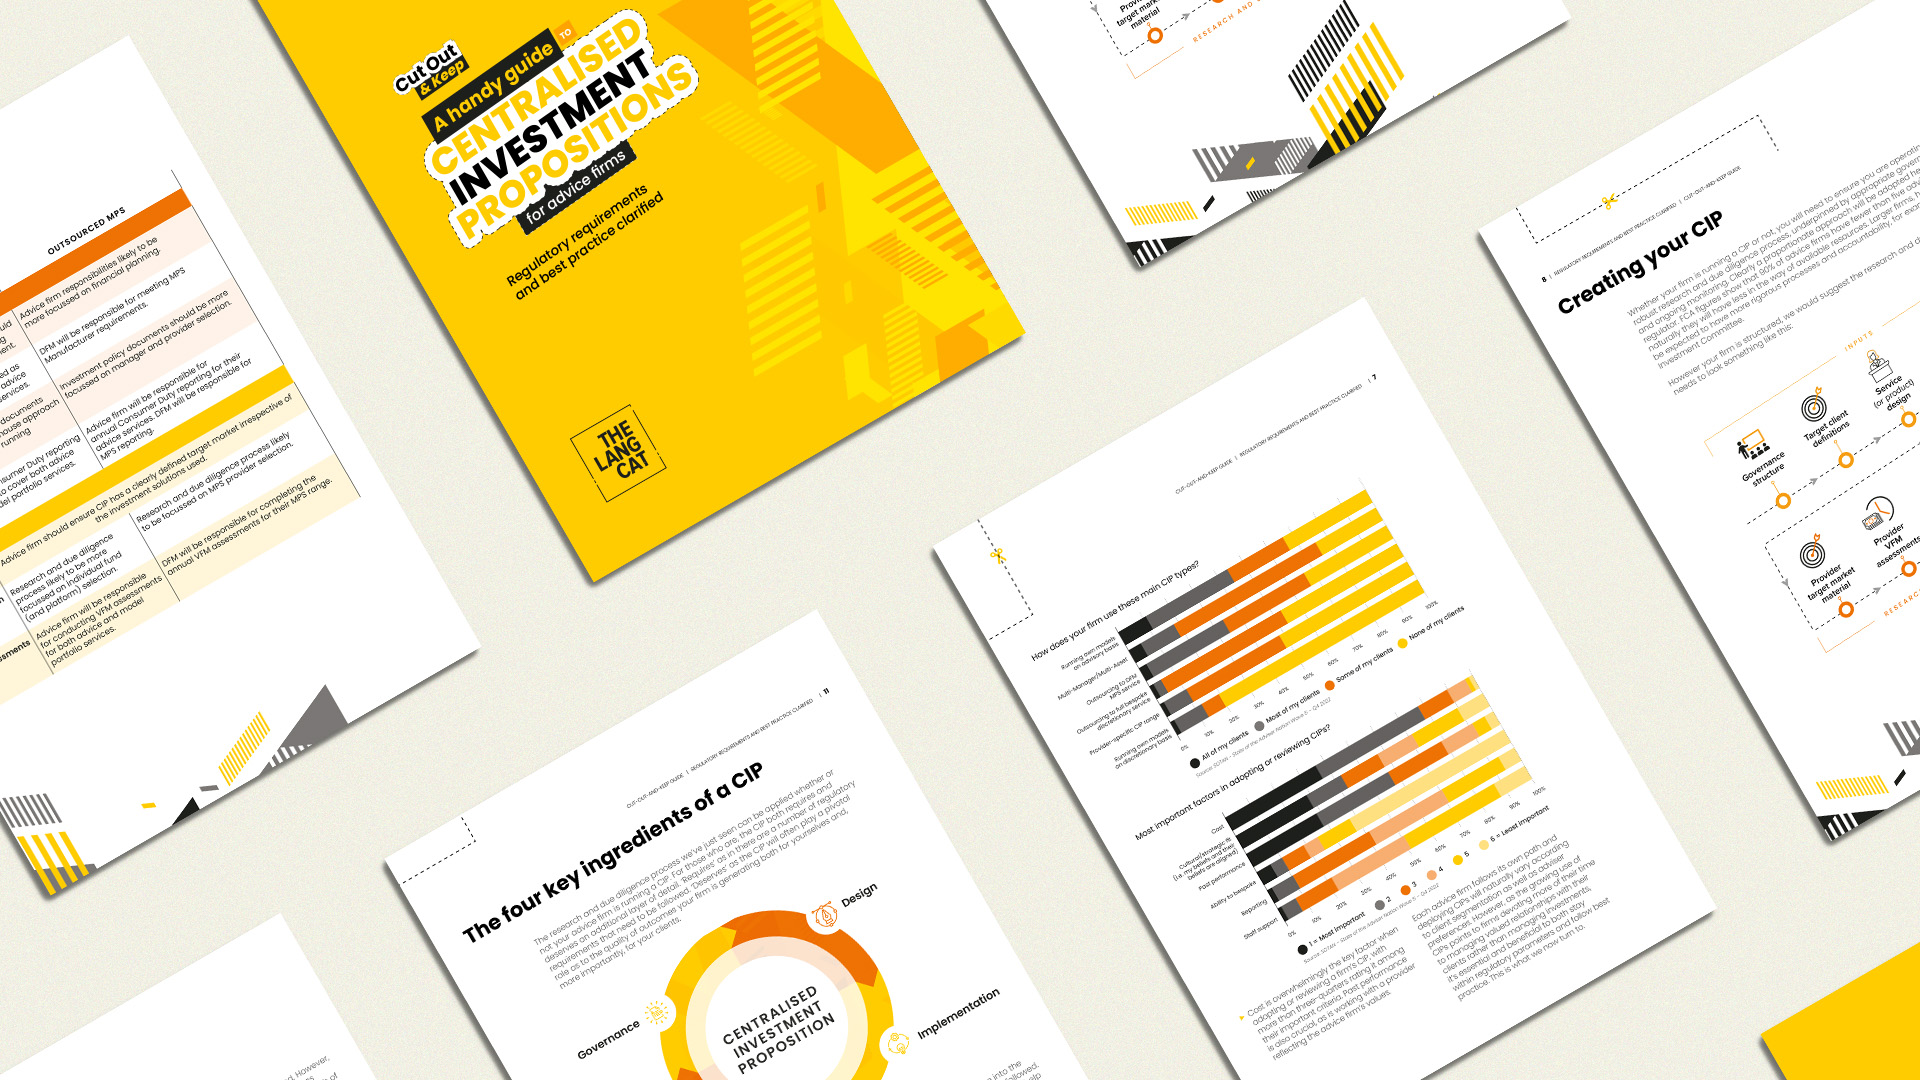 A preview of the front cover and inside pages of our guide to Centralised Investment Propositions